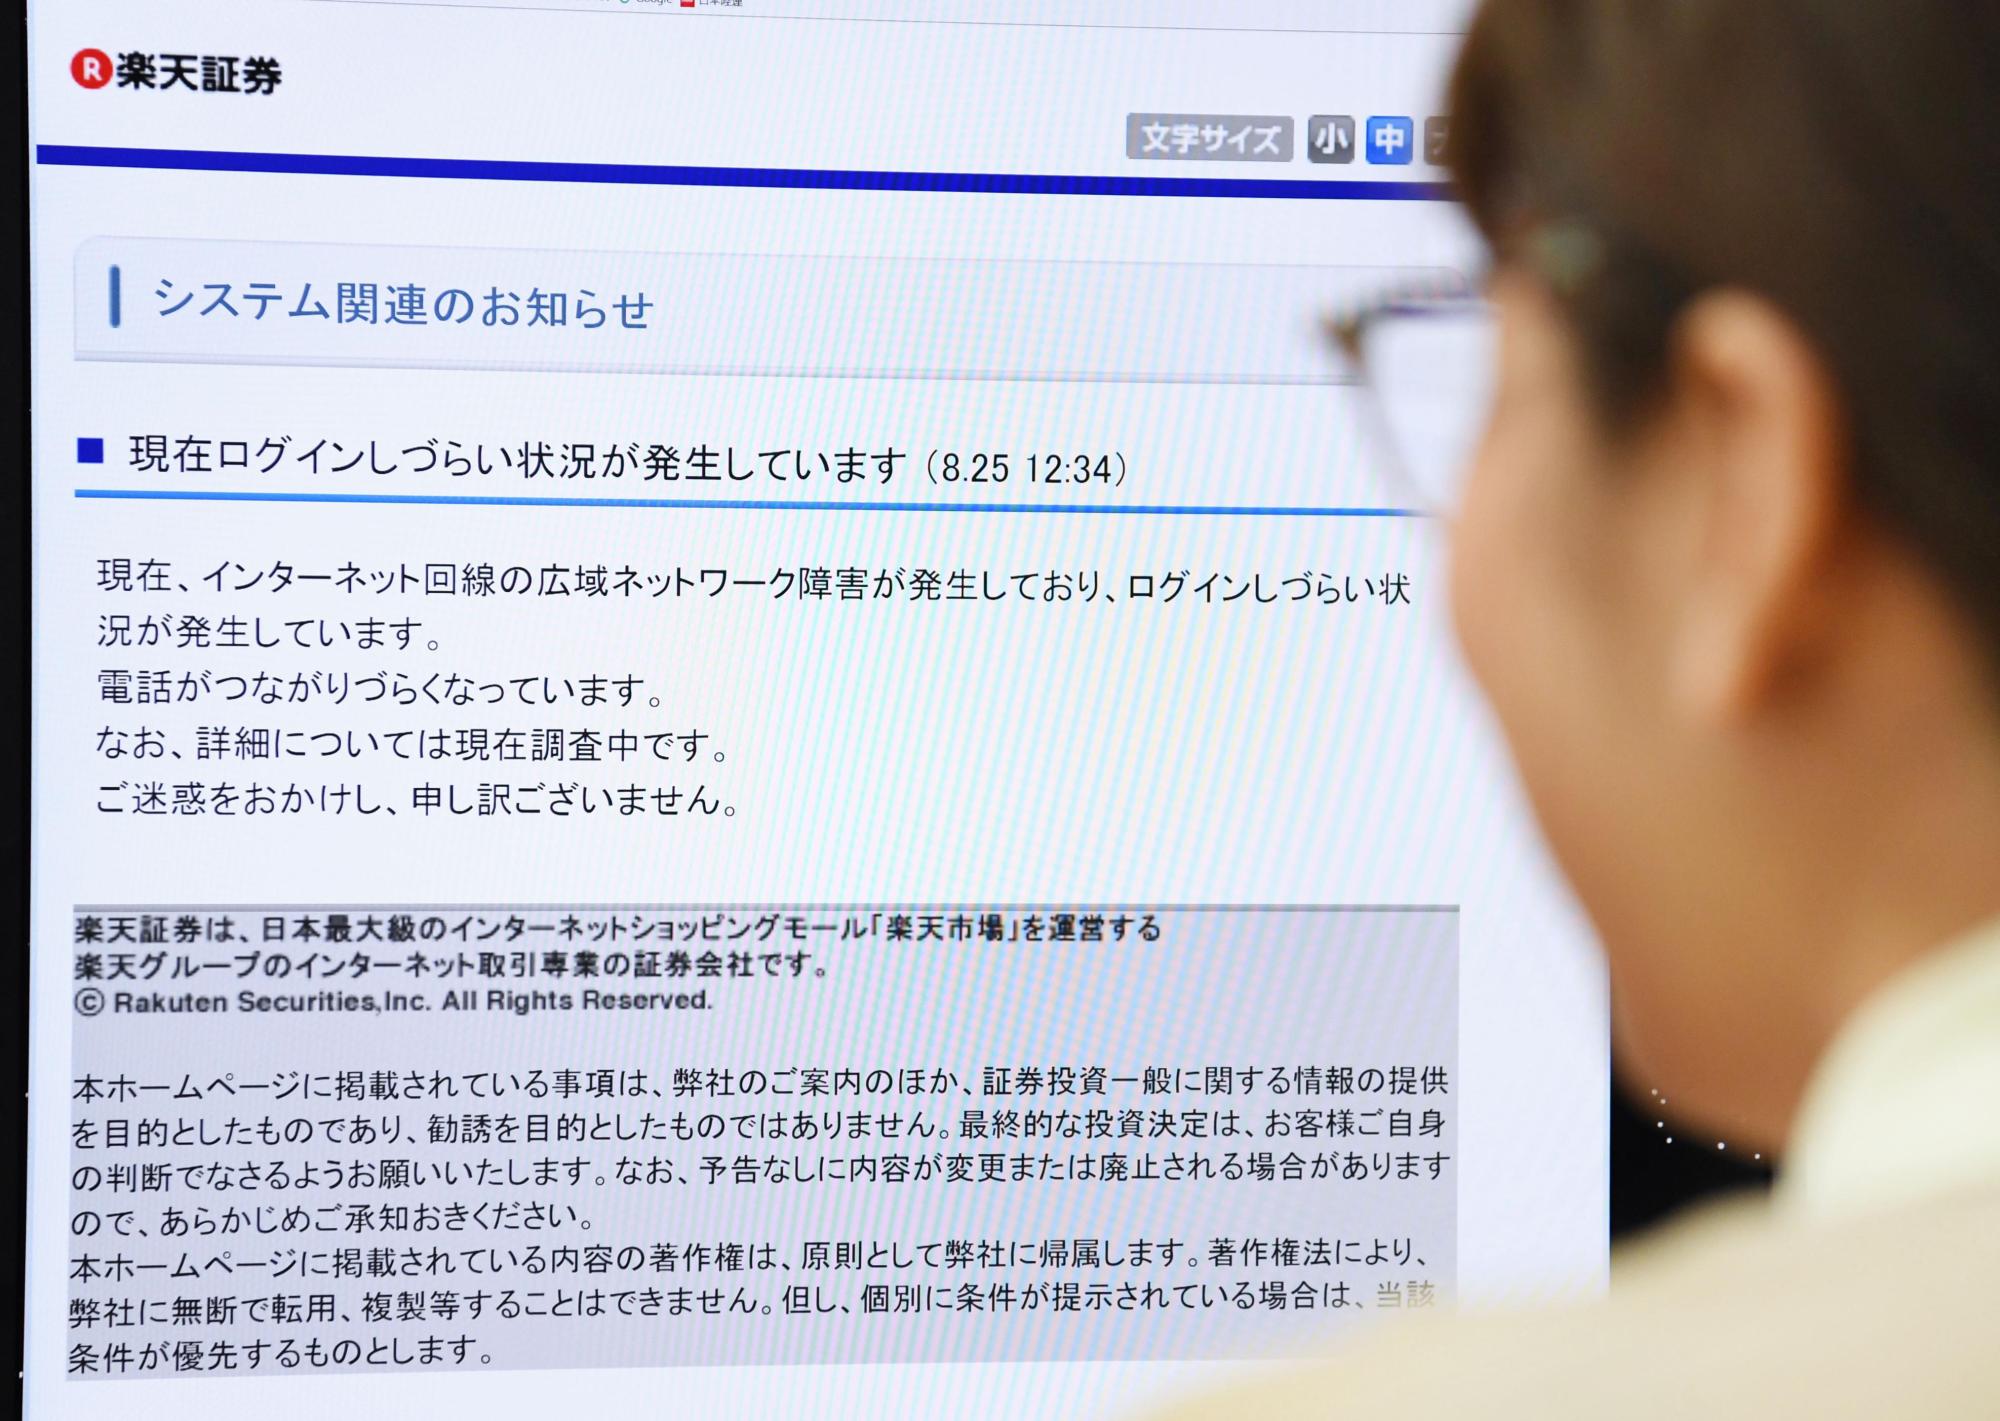 The website at Rakuten Securities Inc. on Friday says the company is experiencing an internet connection problem. | KYODO